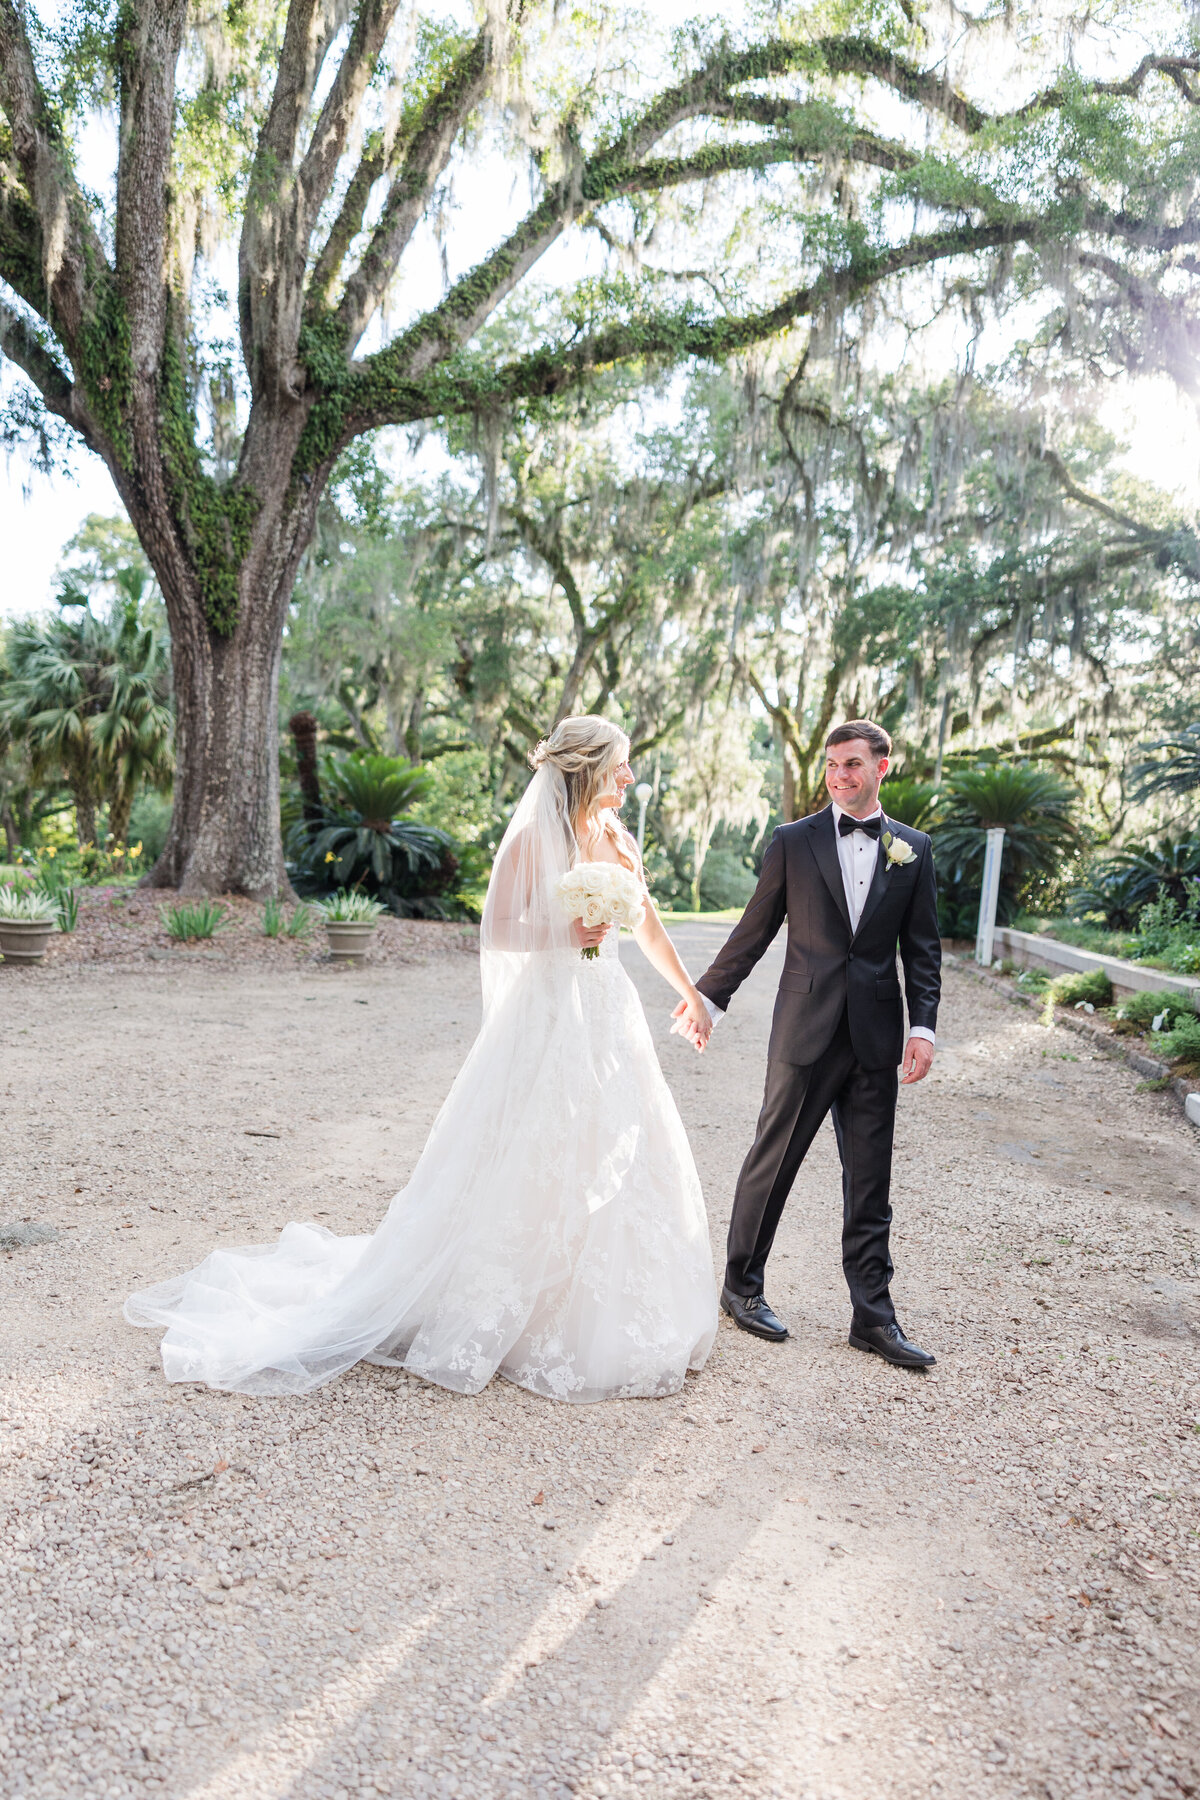 Mary Warren & Justin Wedding - Taylor'd Southern Events - Florida Photographer-2629